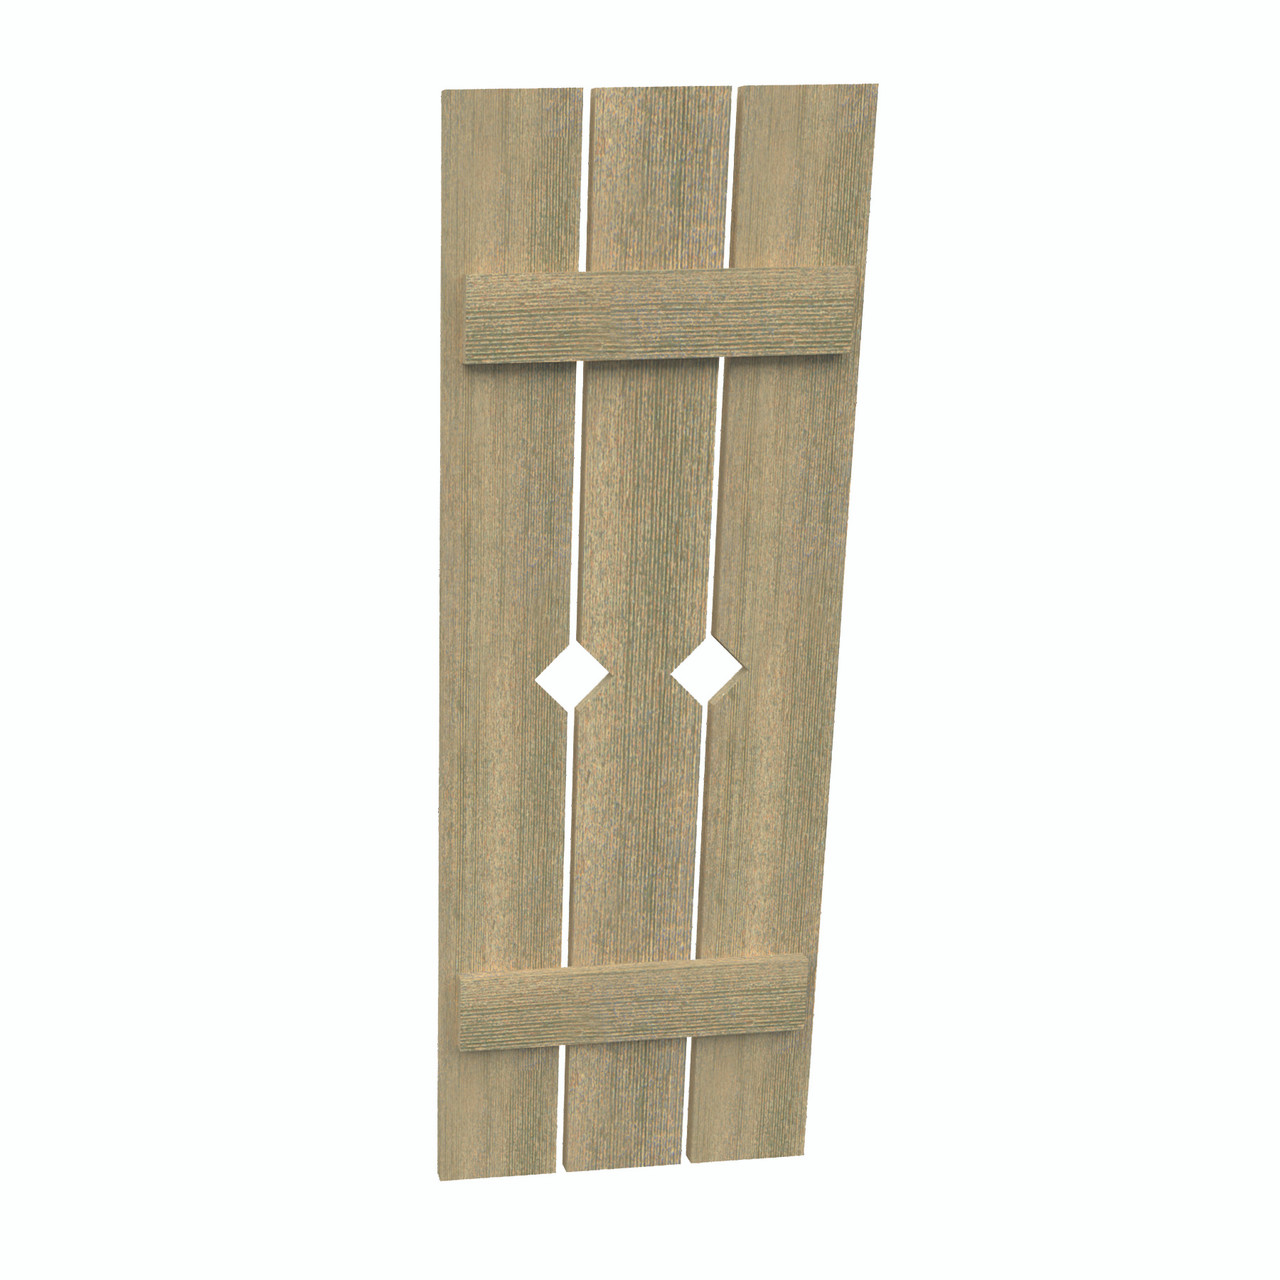 18 inch by 71 inch Plank Shutter with 3-Plank, Diamond